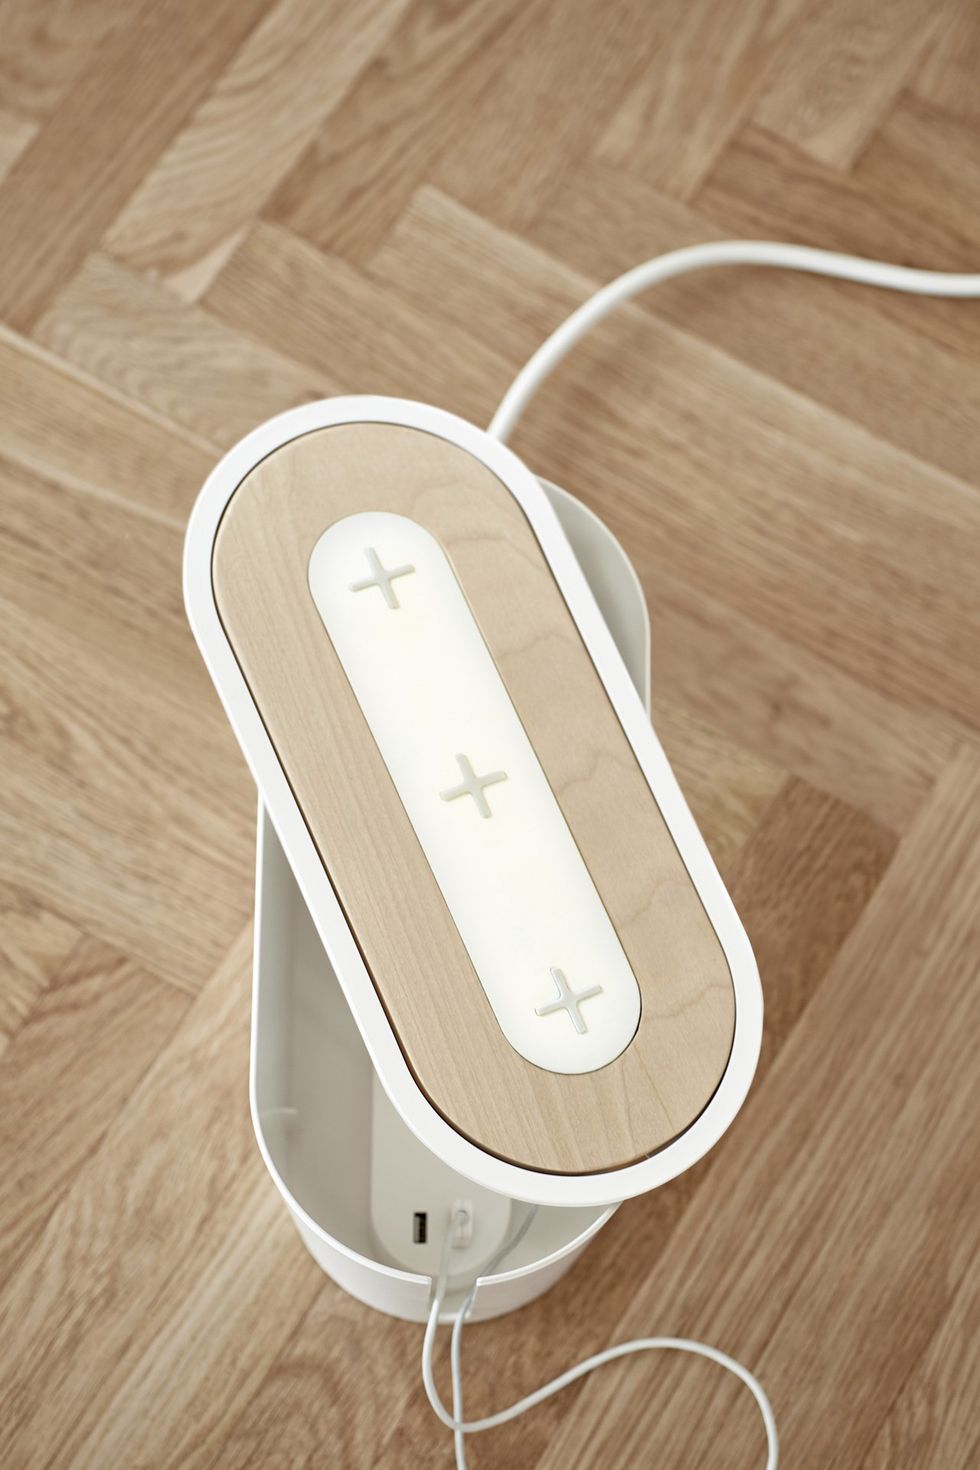 The new phone charging range from Ikea is genius